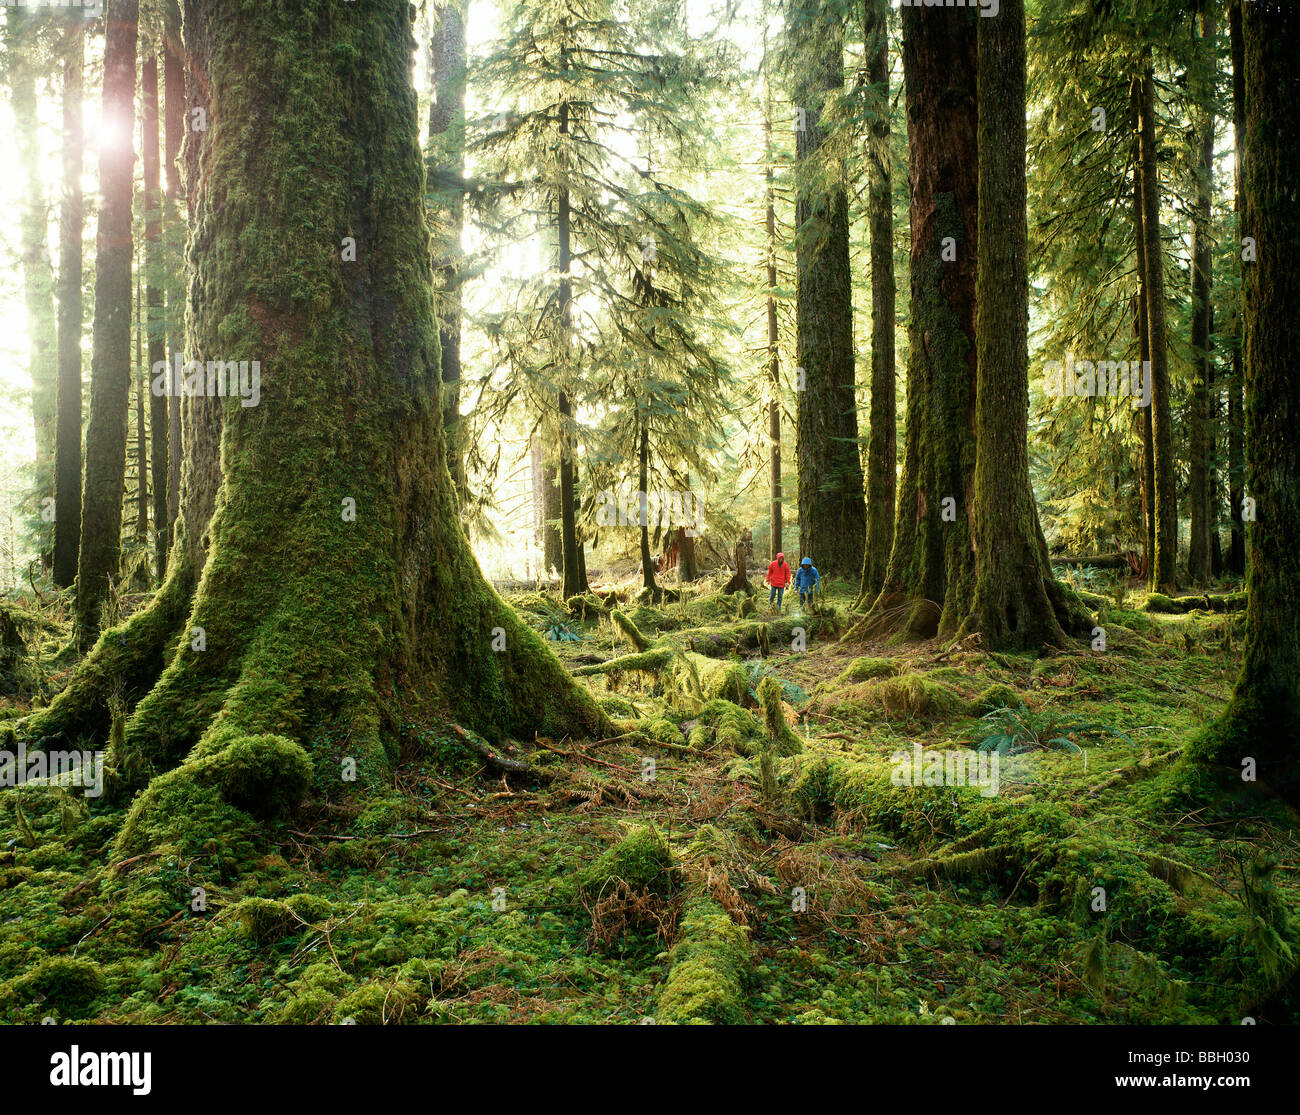 Two hikers explore the beautiful Hoh Rain Forest in The Olympic National Park in Washington State's western most region. Stock Photo